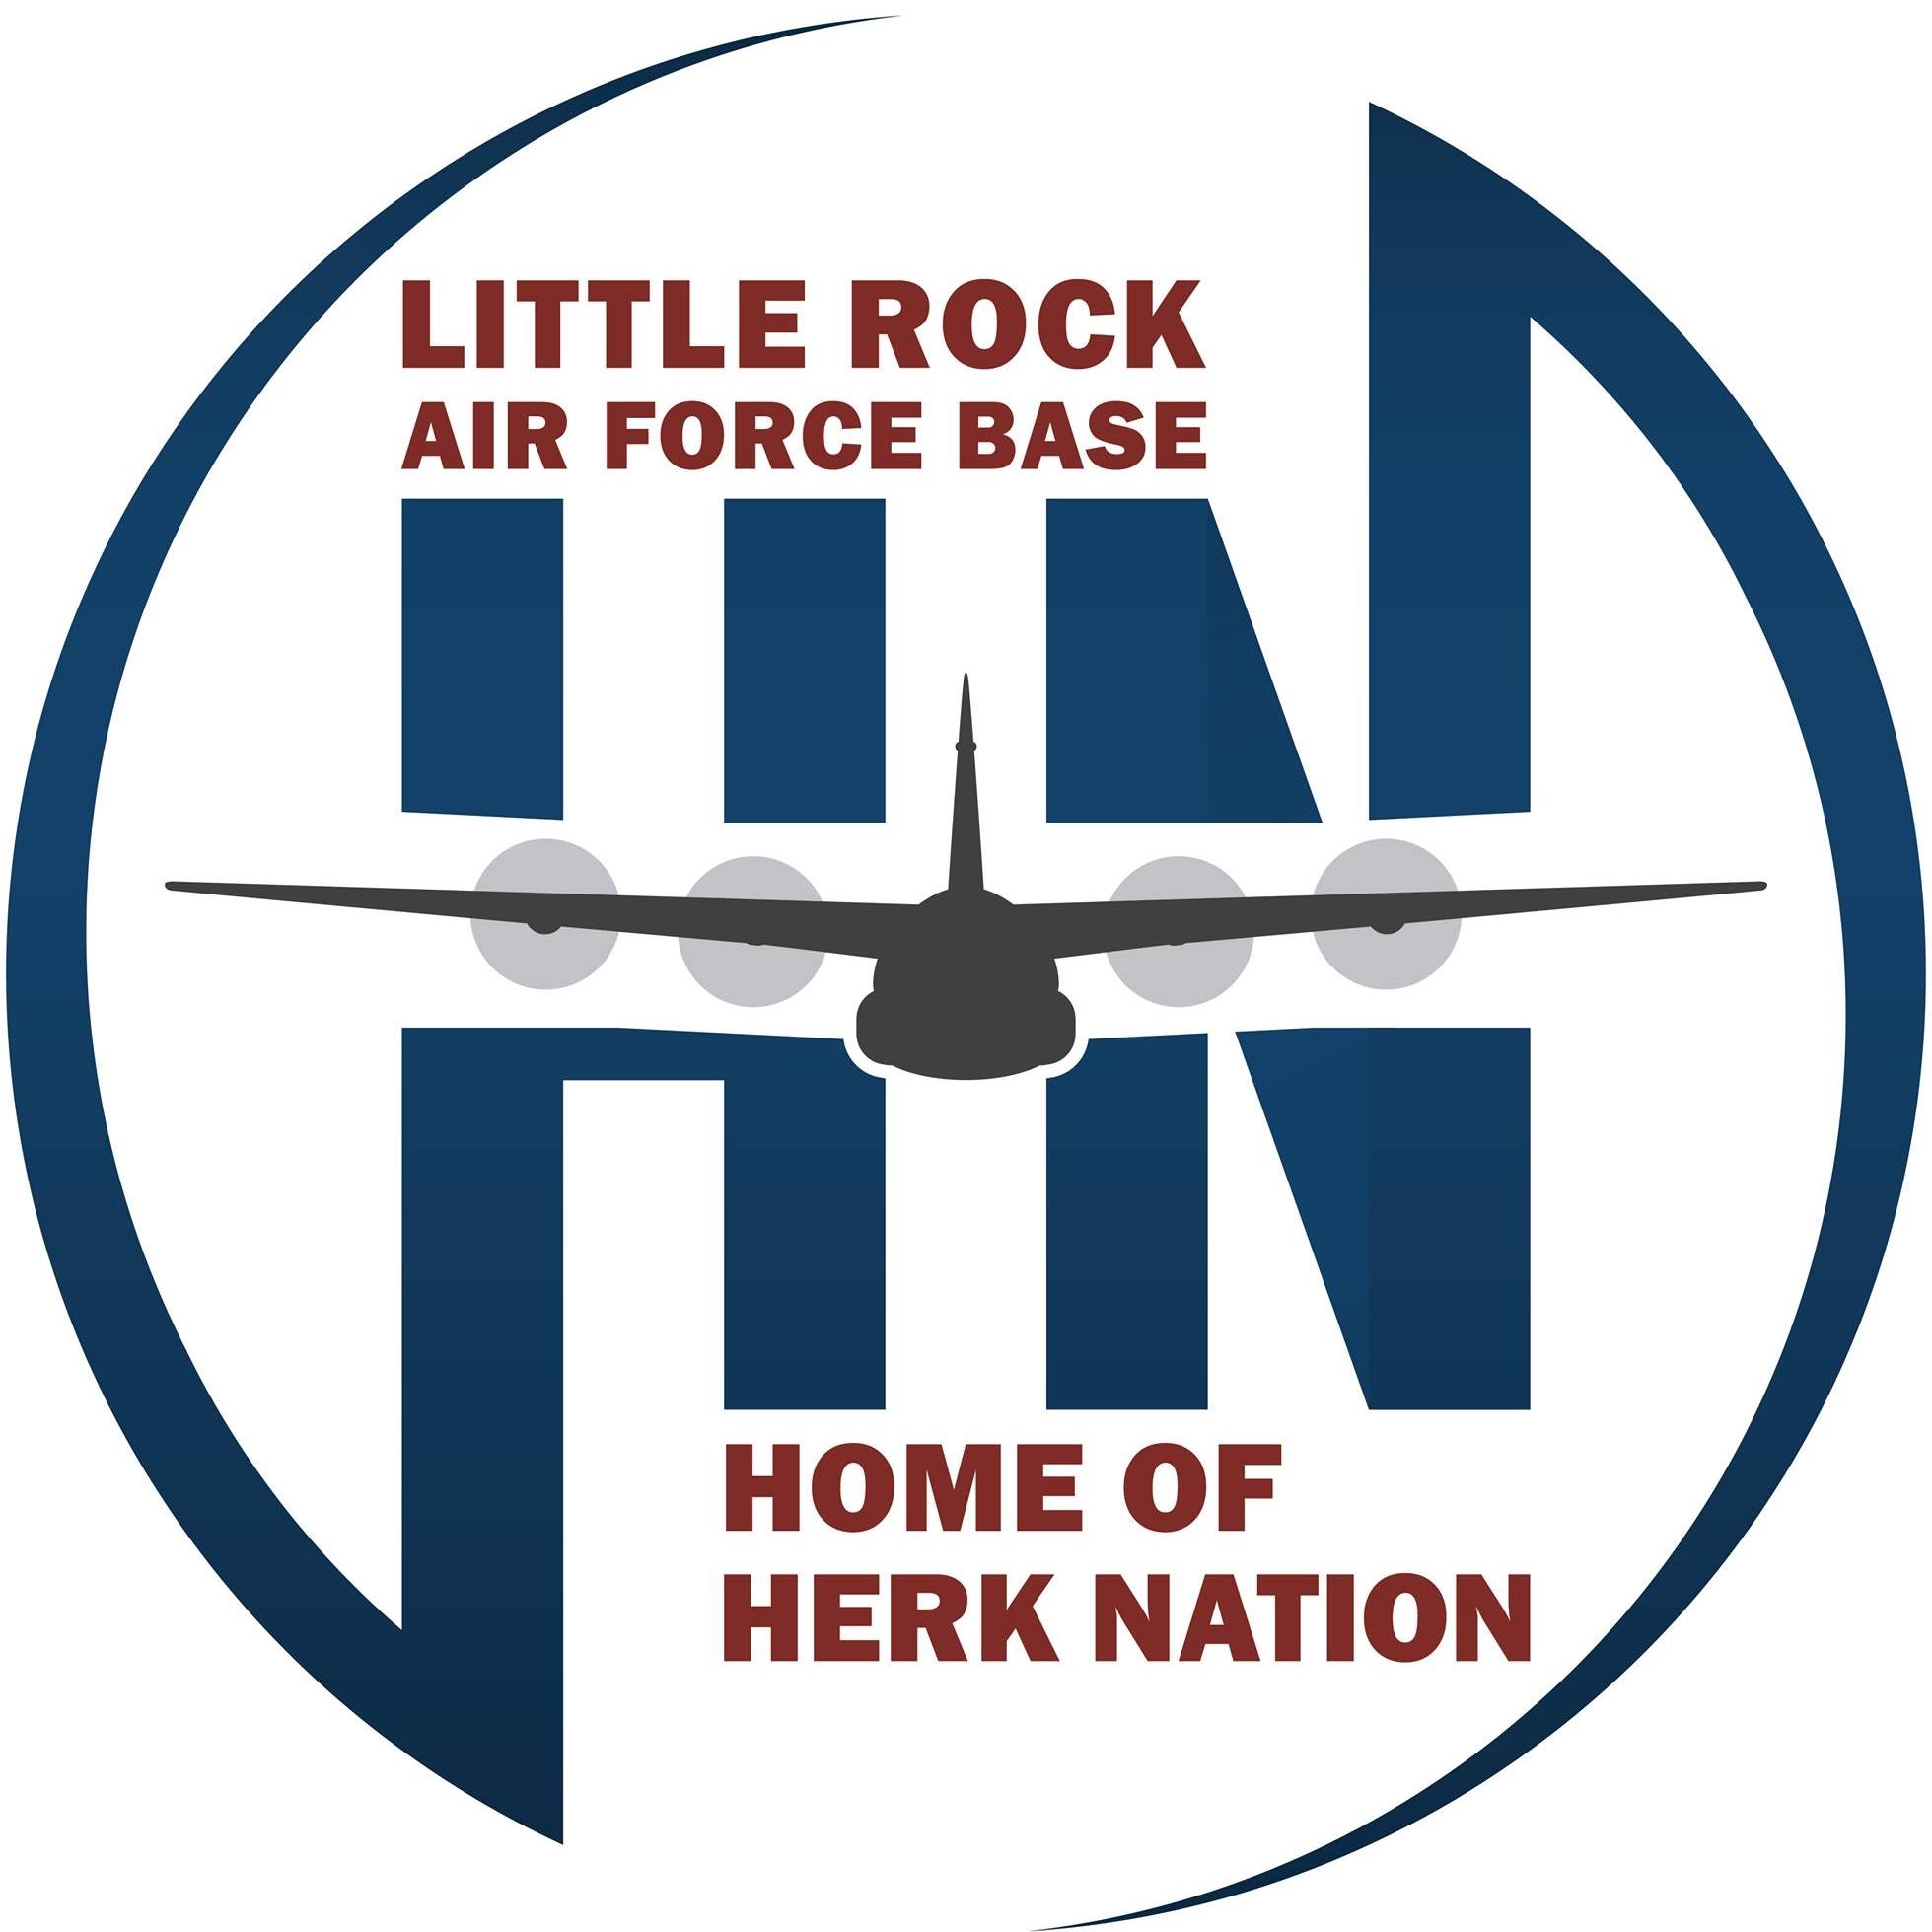 The Little Rock Air Force Base 